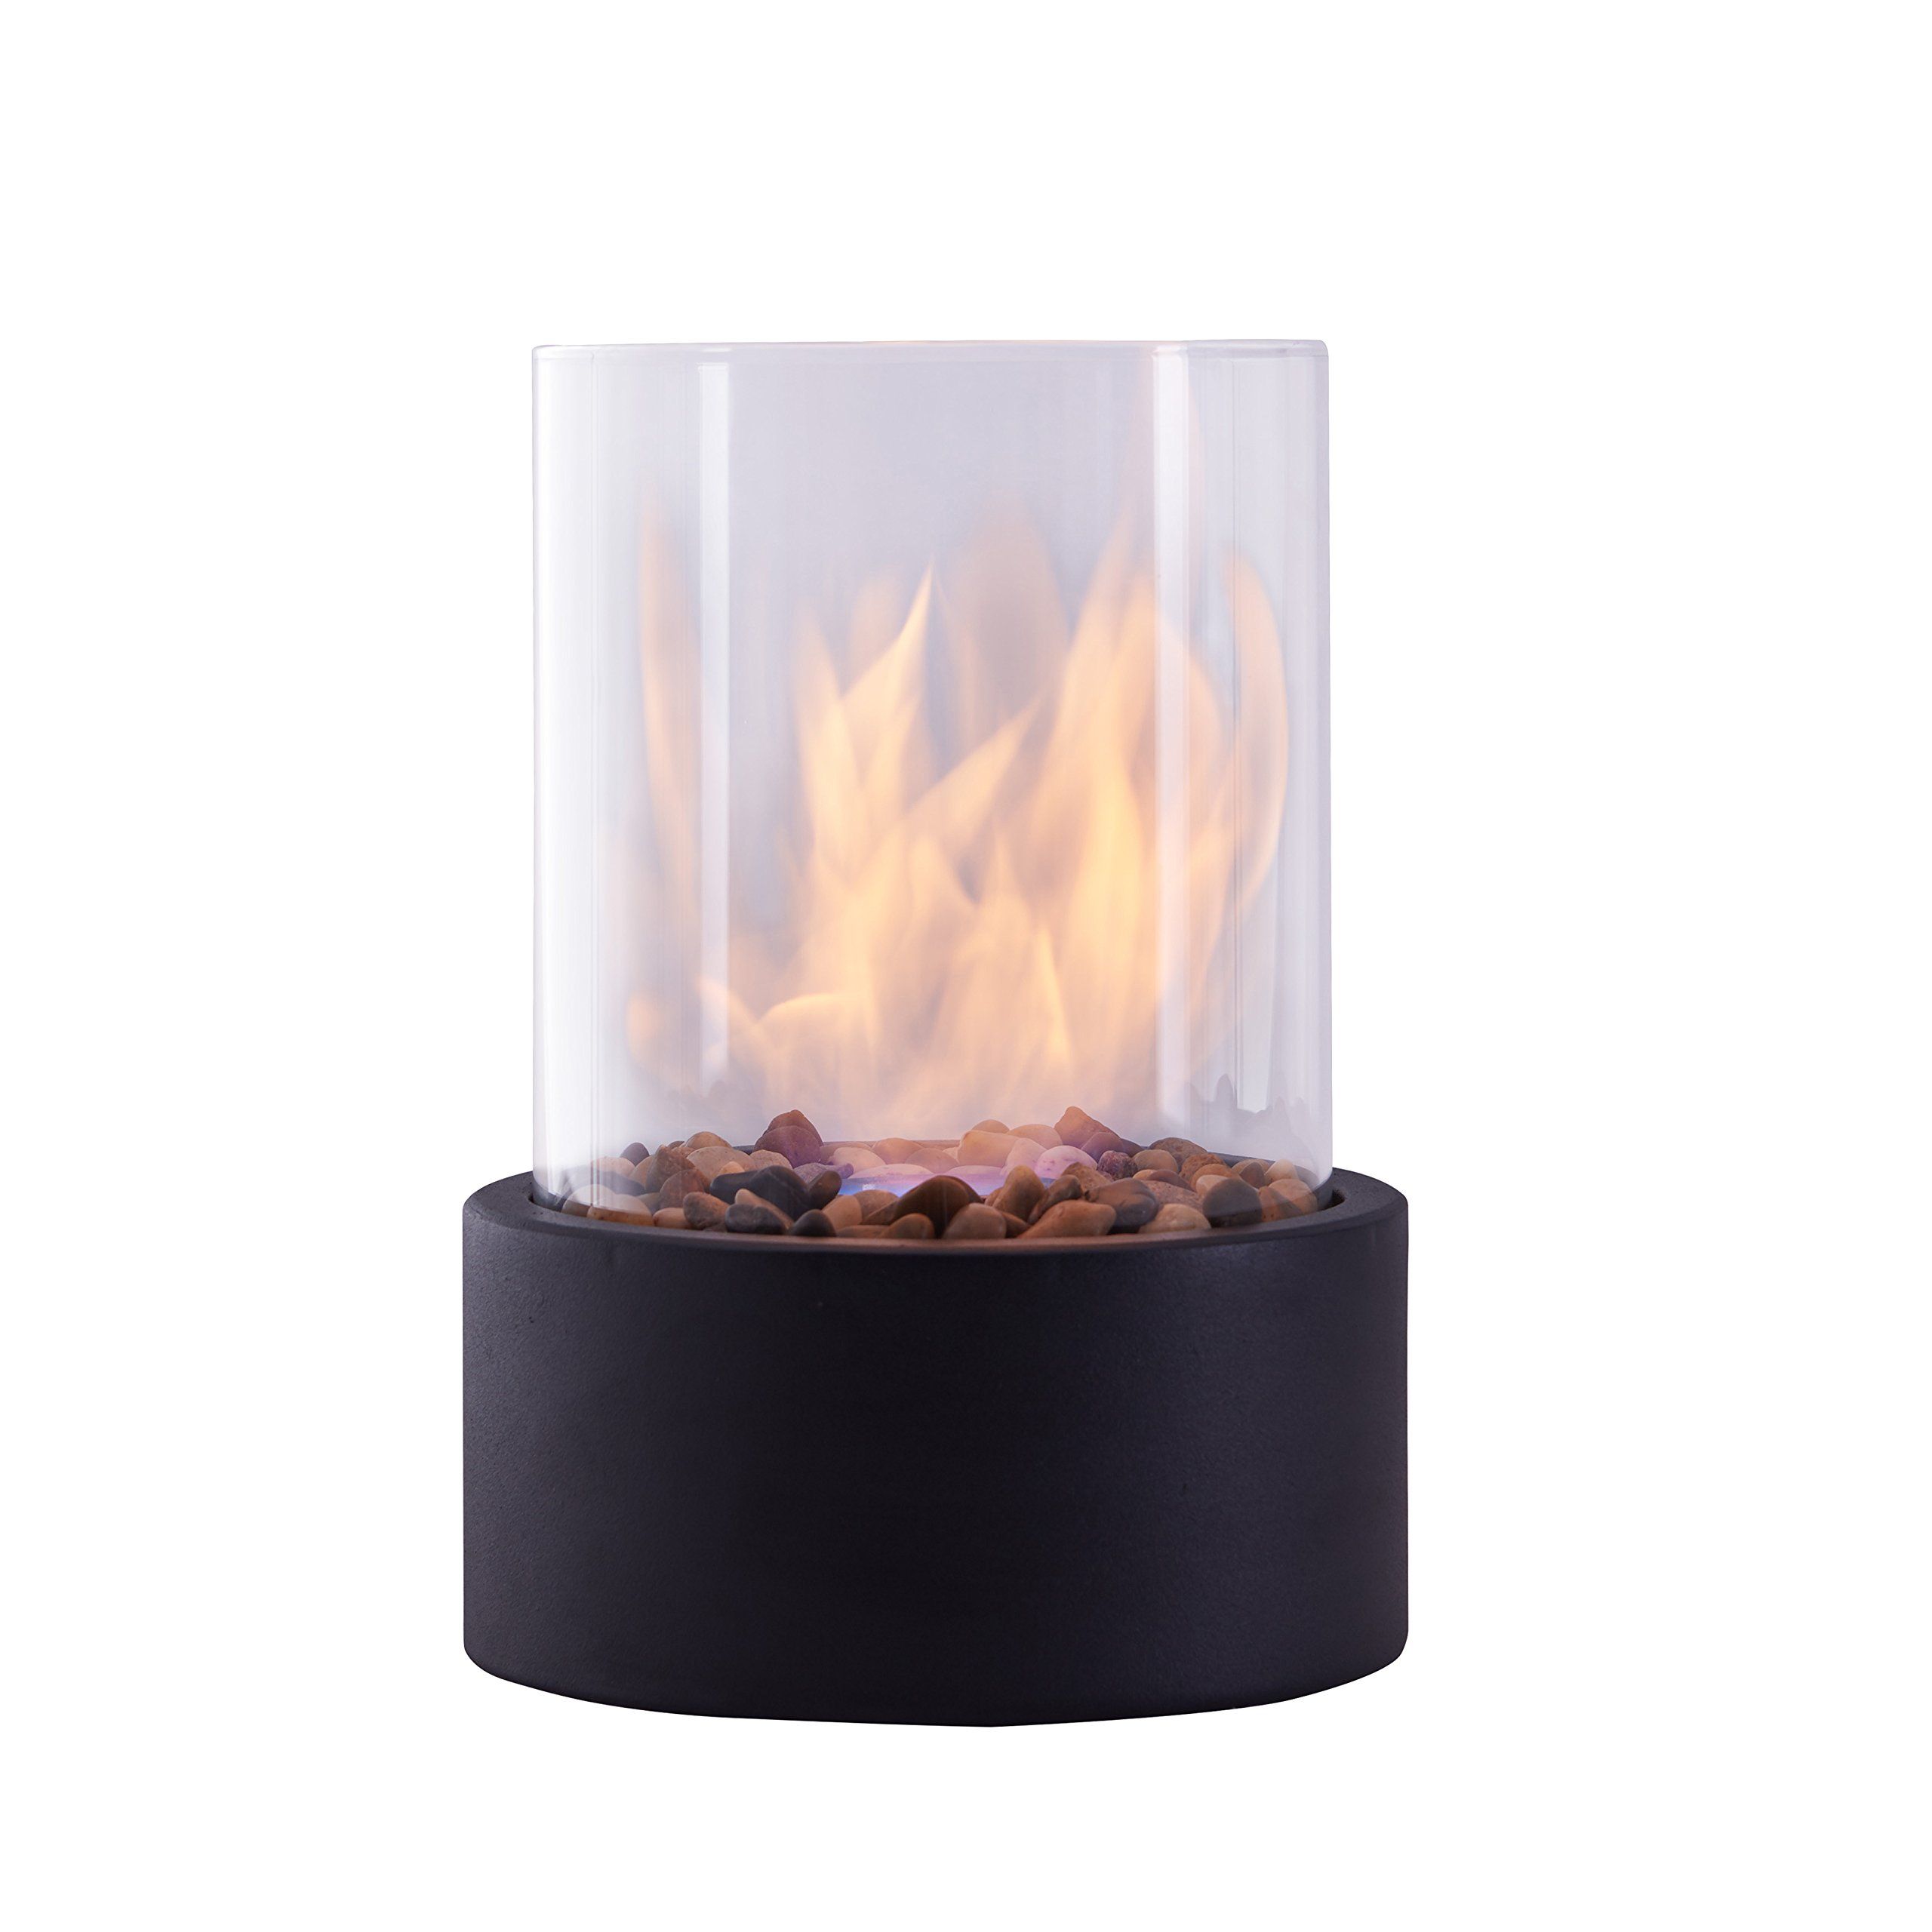 Danya B. Indoor/Outdoor Portable Tabletop Fire Pit – Clean-Burning Bio Ethanol Ventless Fireplace - Small | Amazon (US)